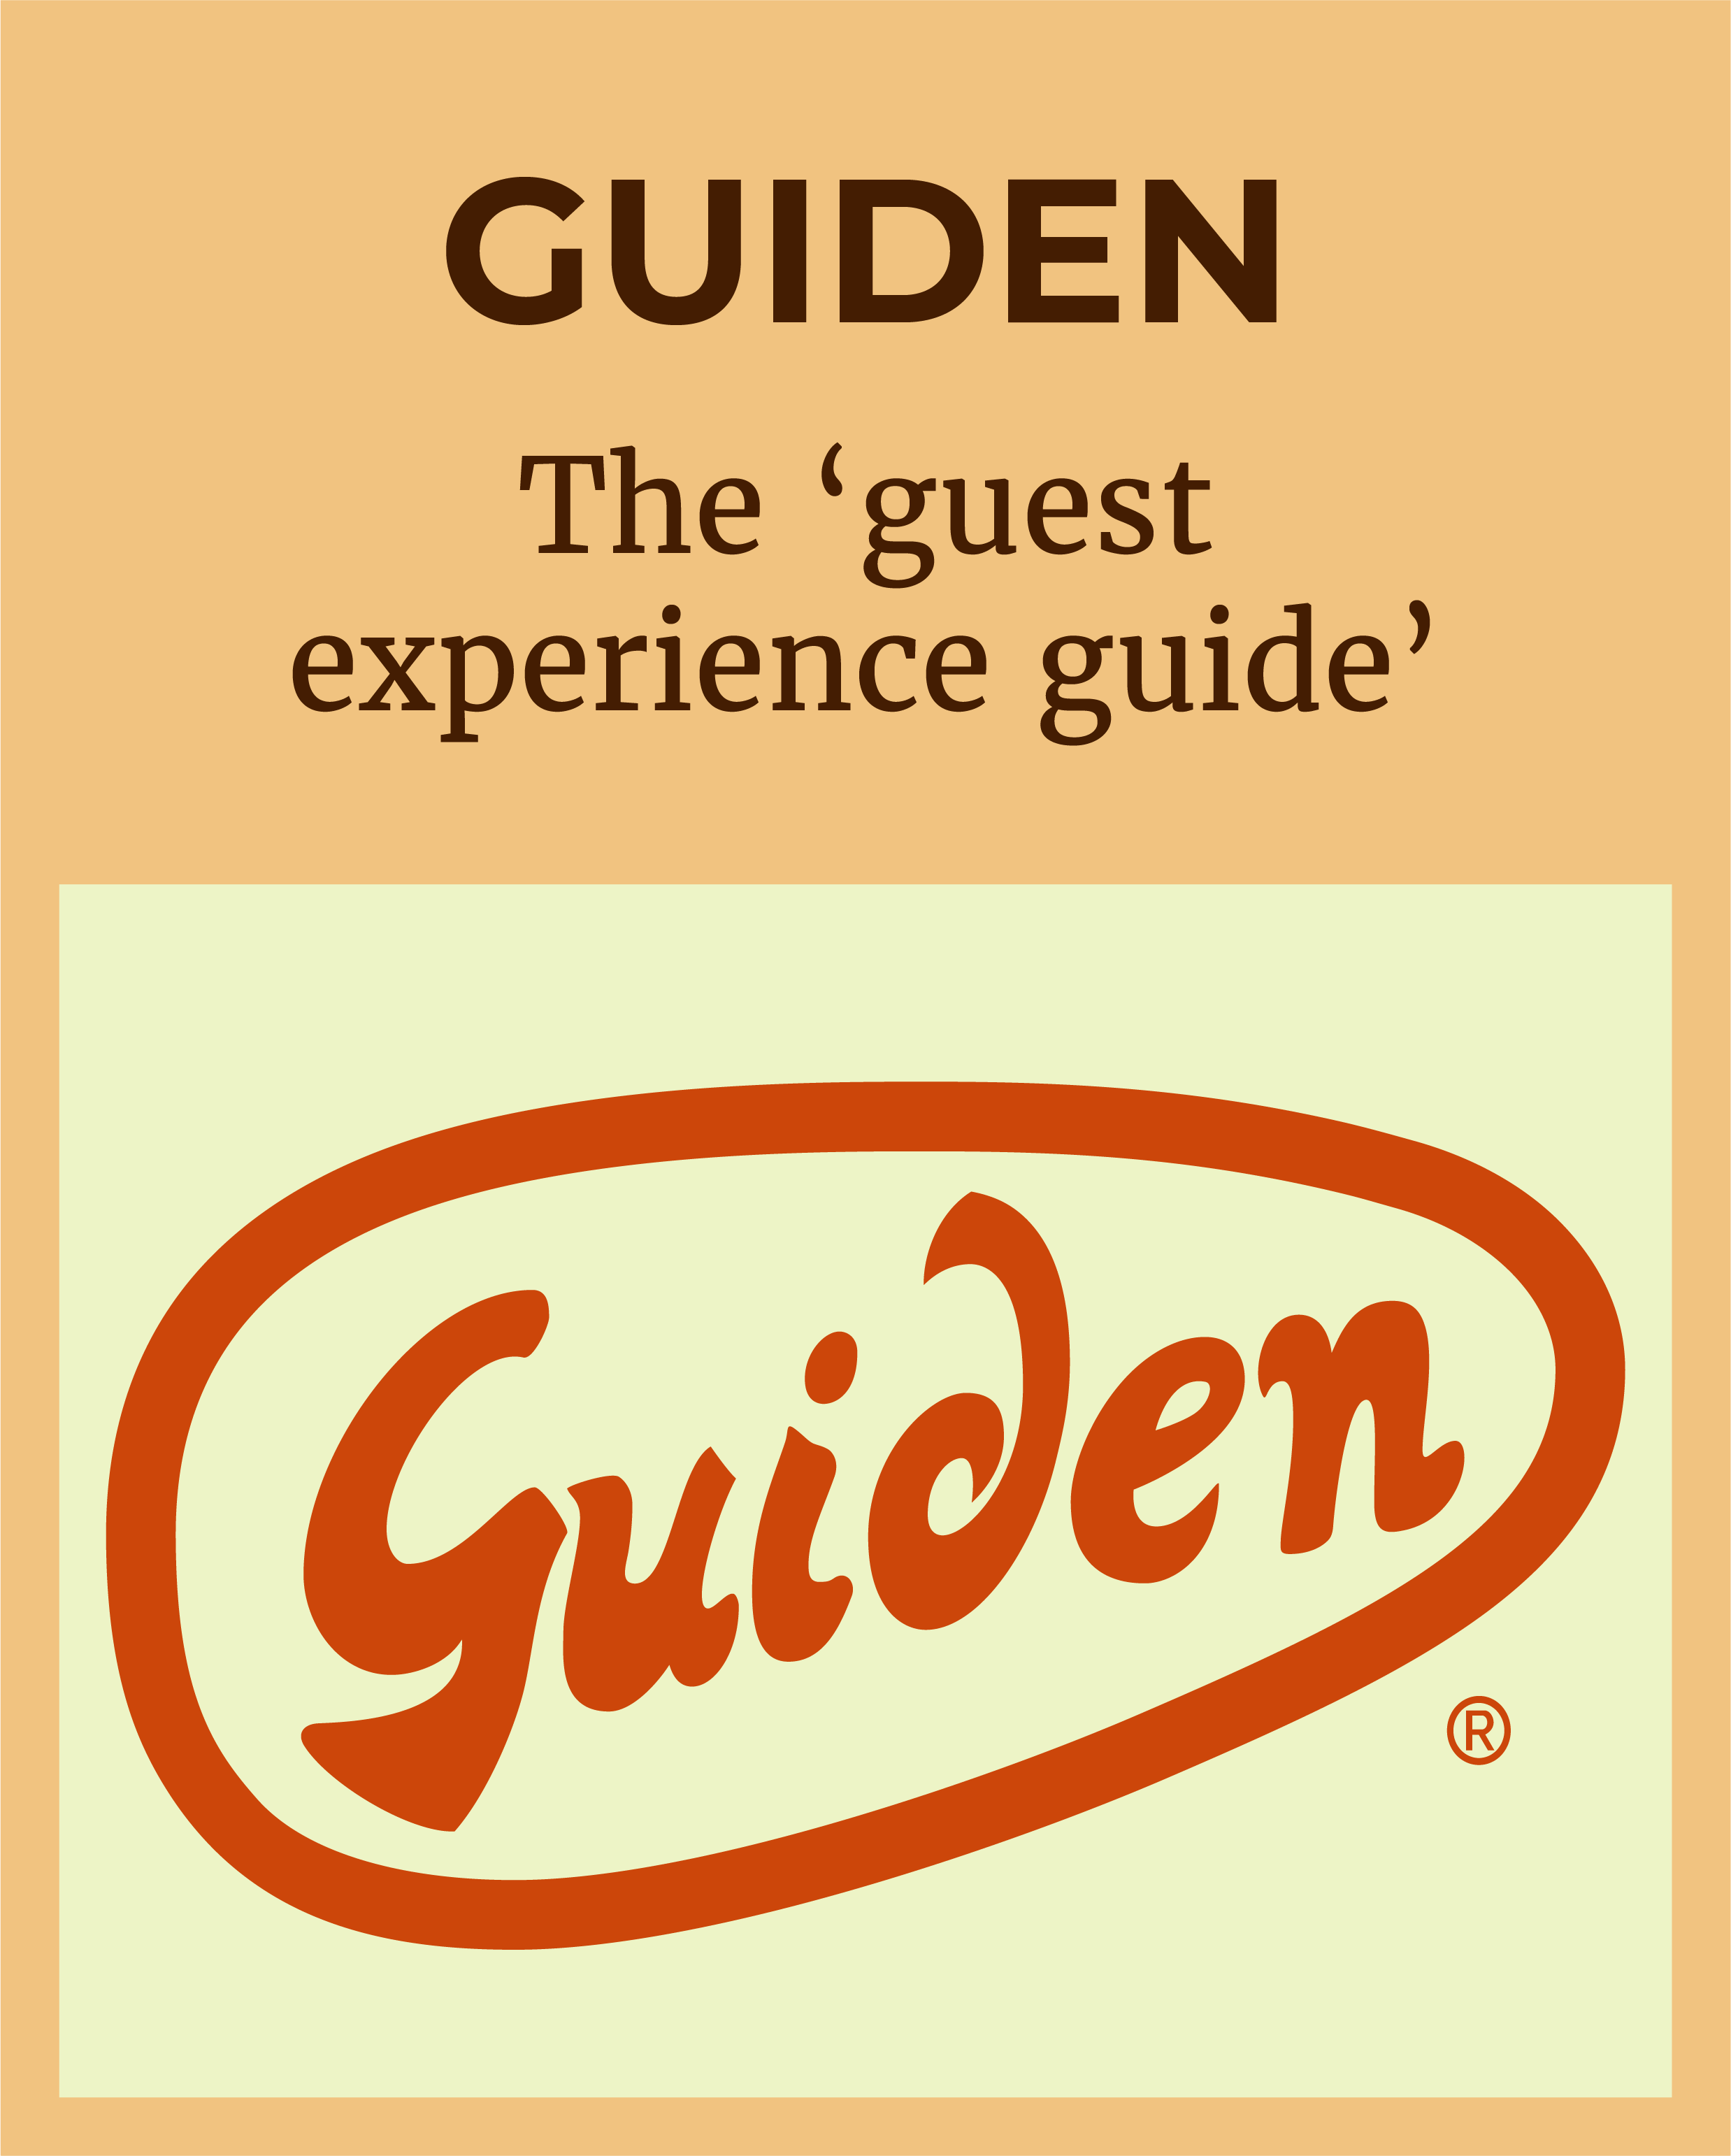 Logo of GUIDEN - the research product that is the 'guest experience guide'